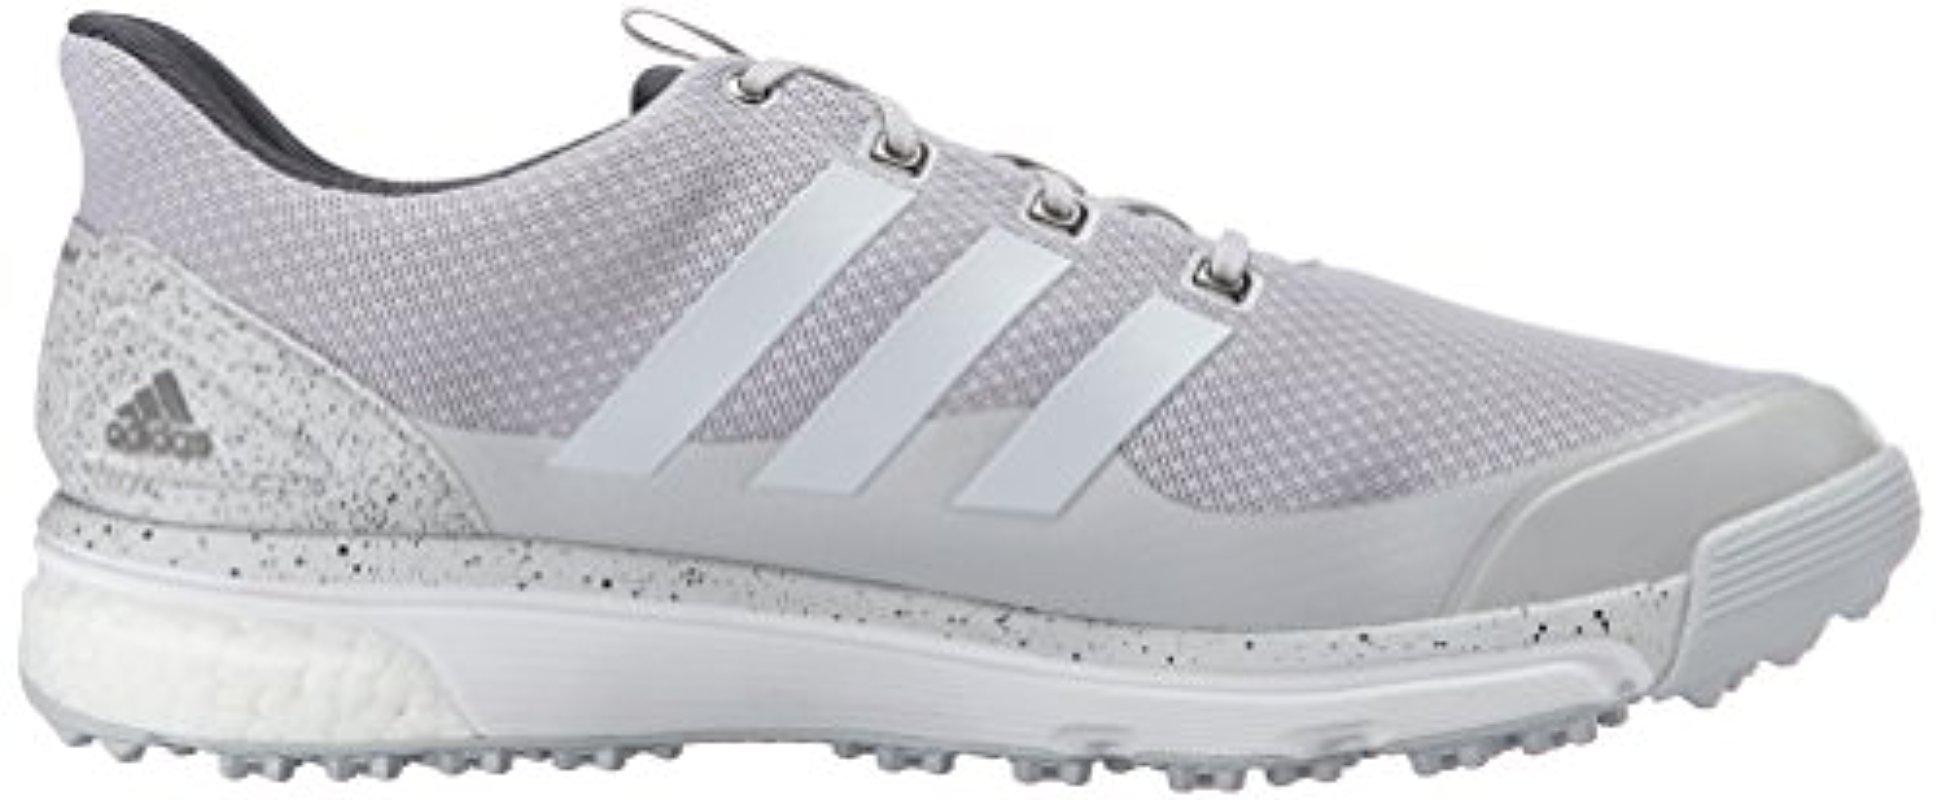 adidas men's adipower s boost 2 golf cleated